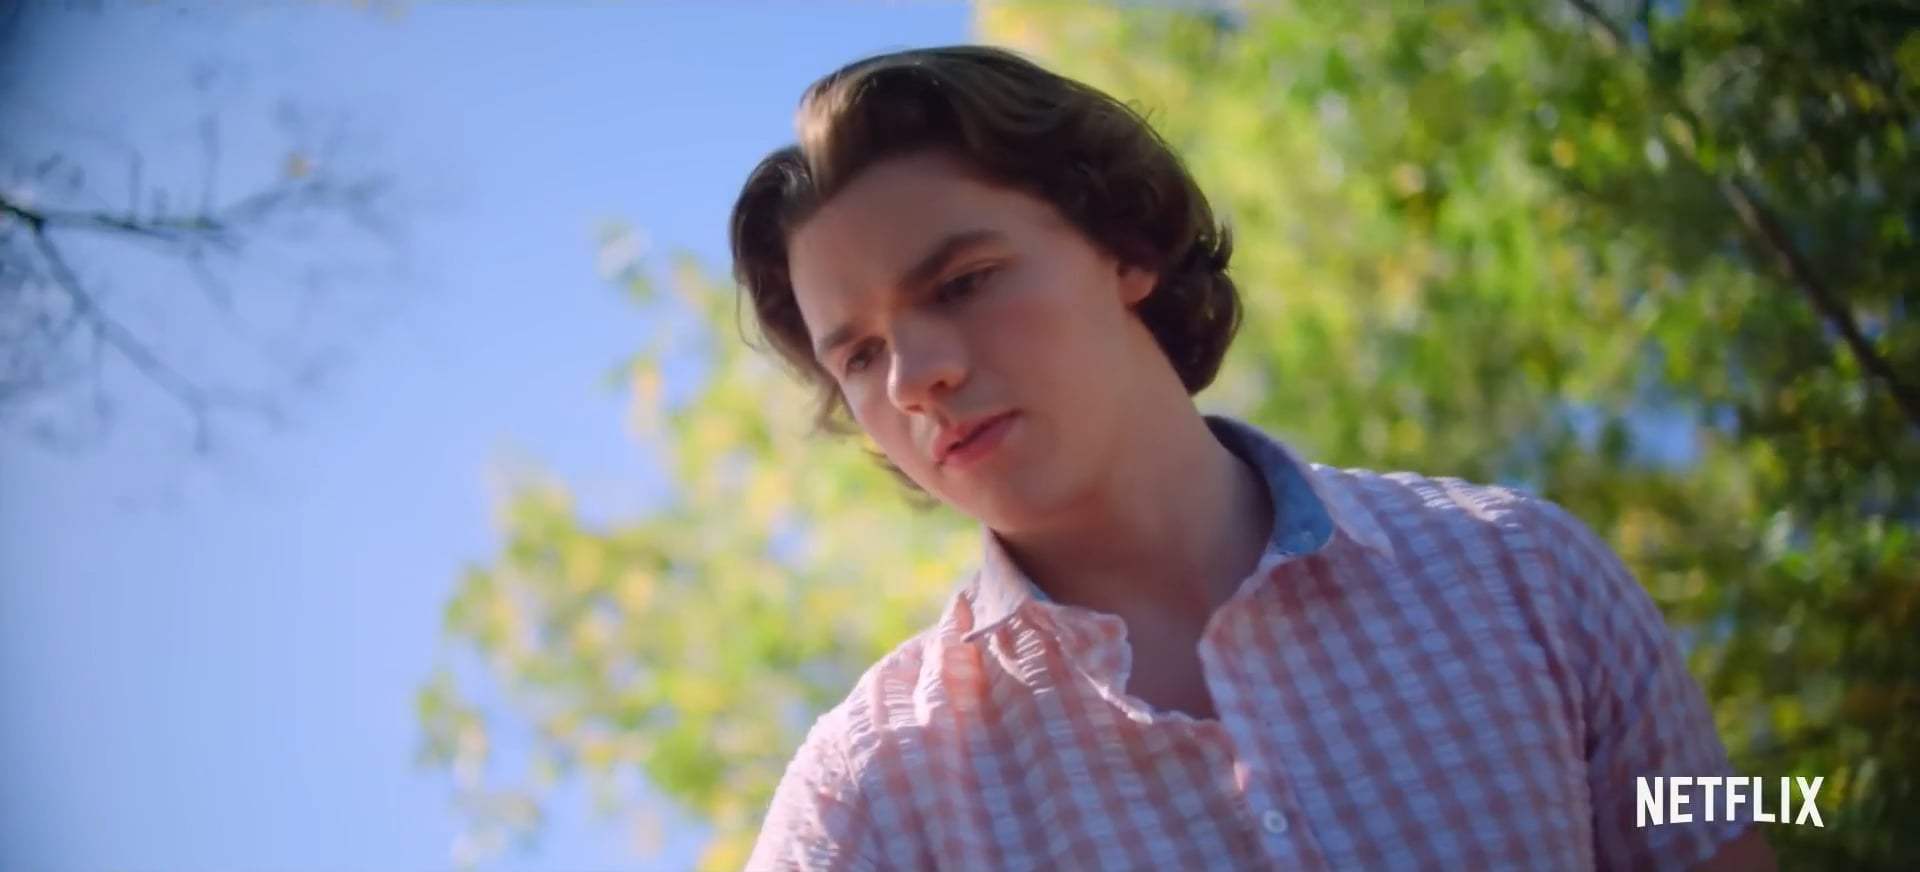 The Kissing Booth 2 Trailer (2020) Screen Capture #3